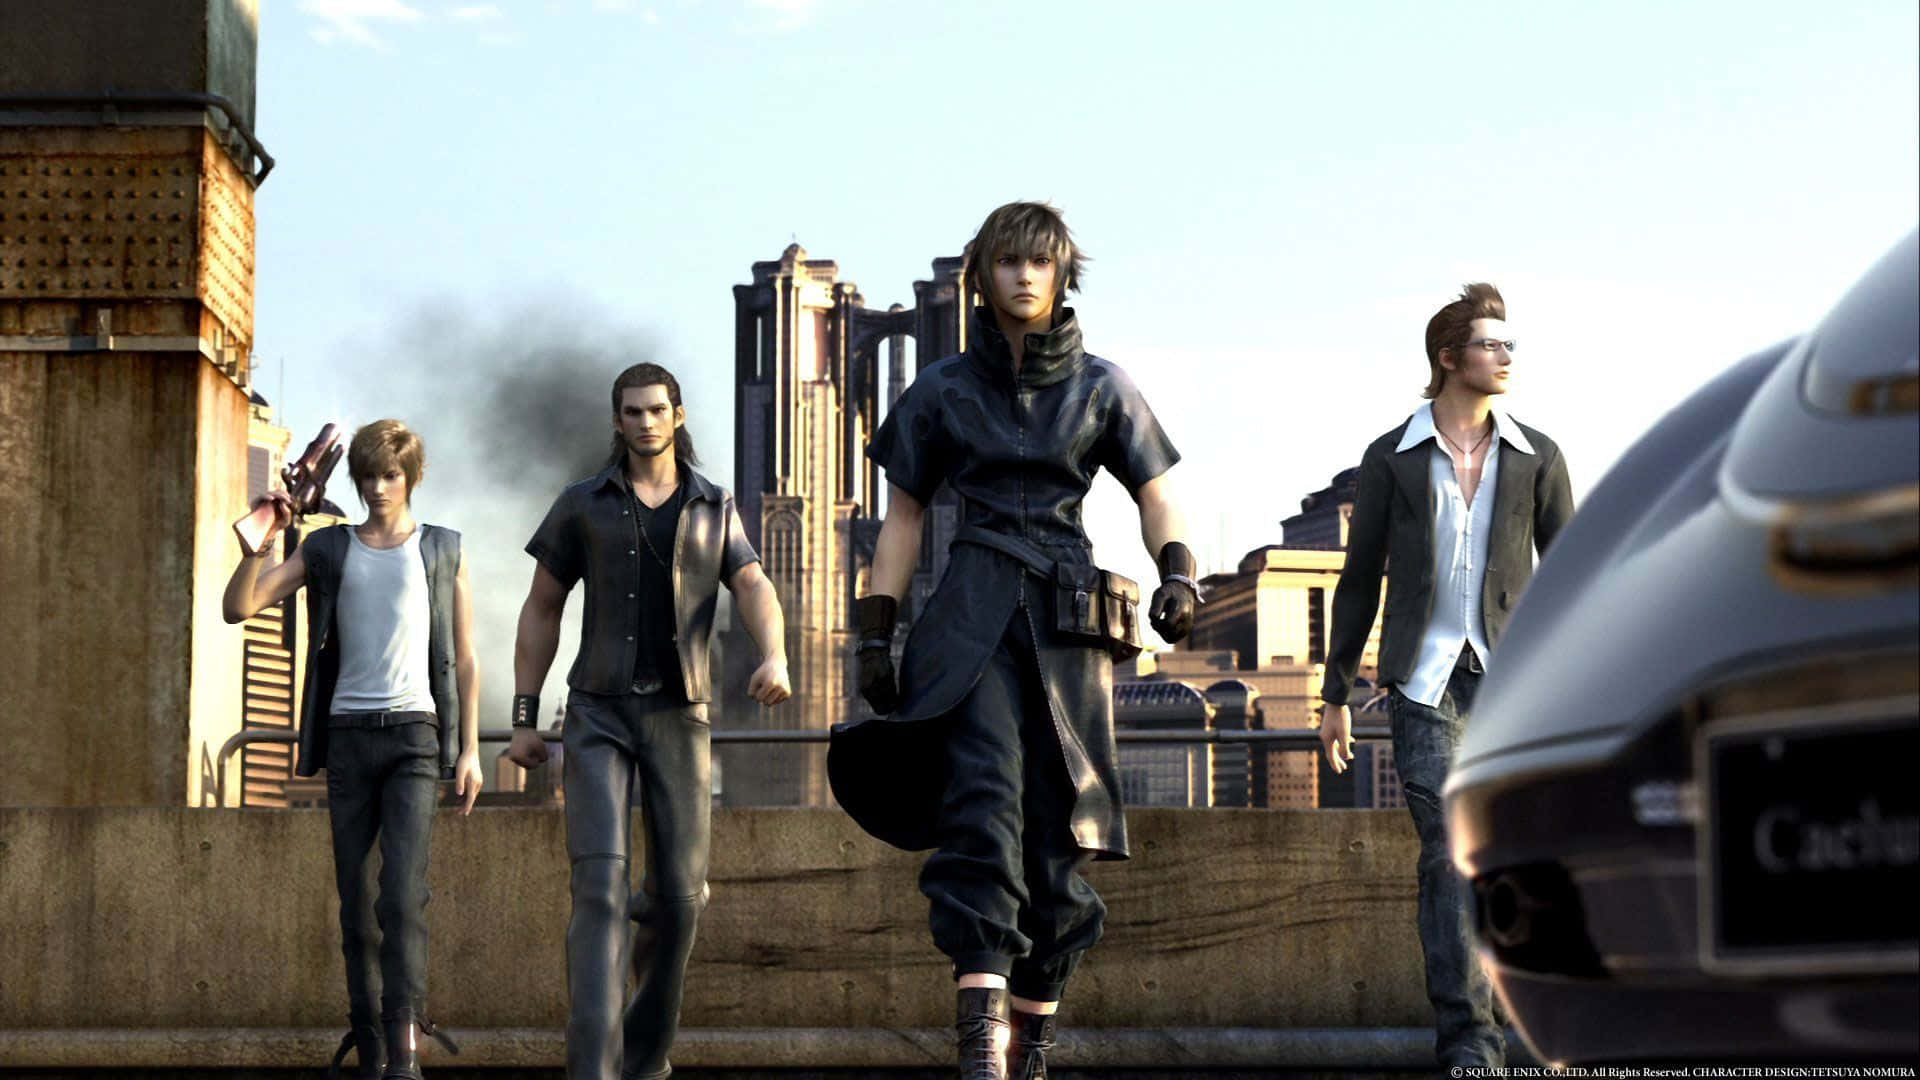 Action-packed adventure awaits in Final Fantasy XV